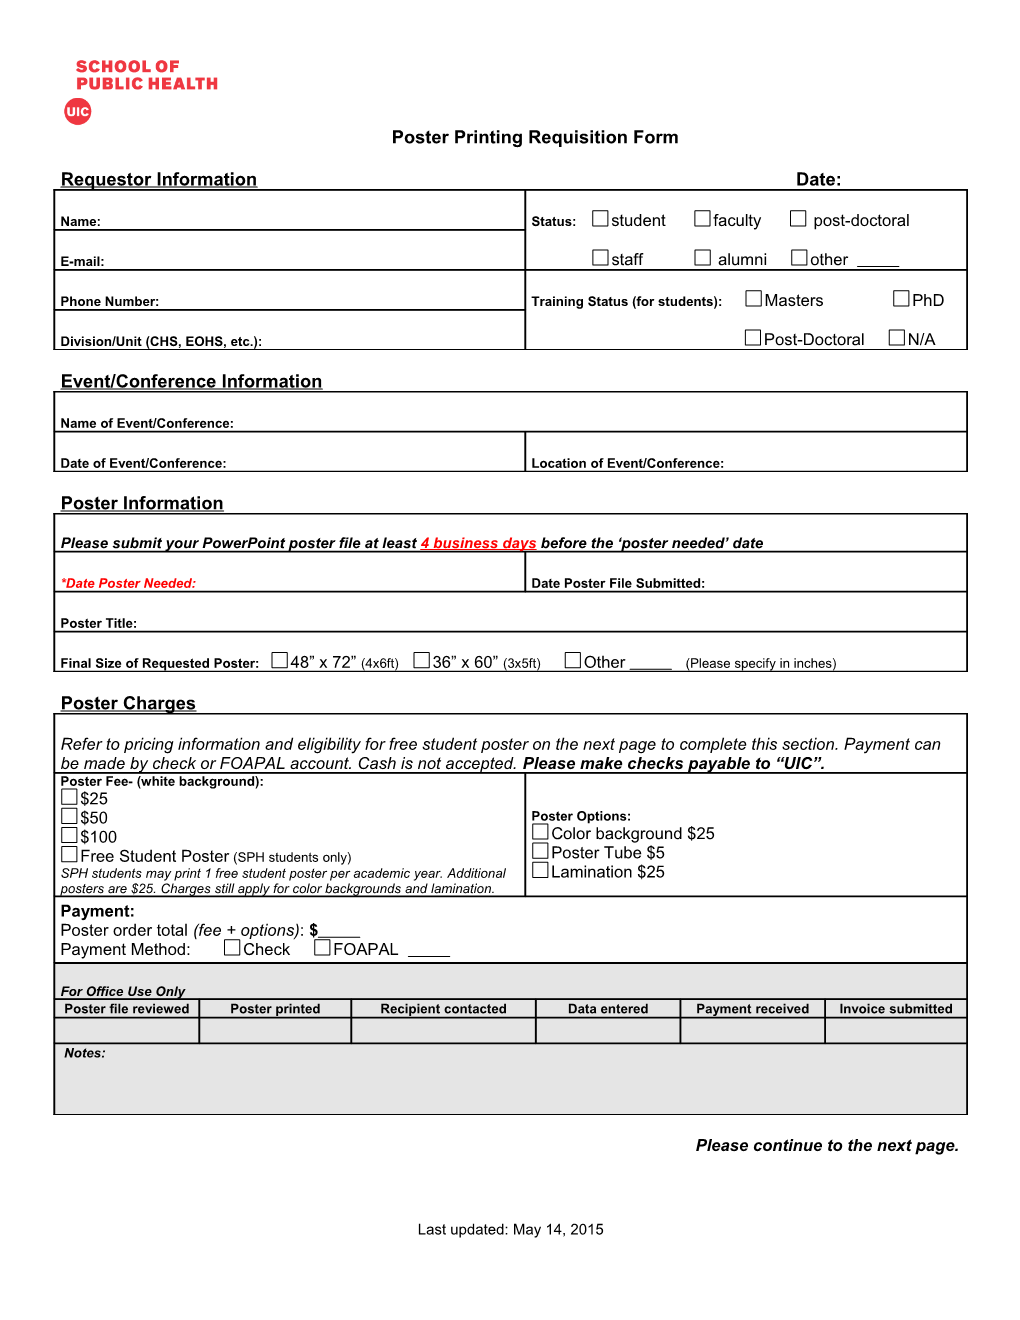 Poster Printing Requisition Form